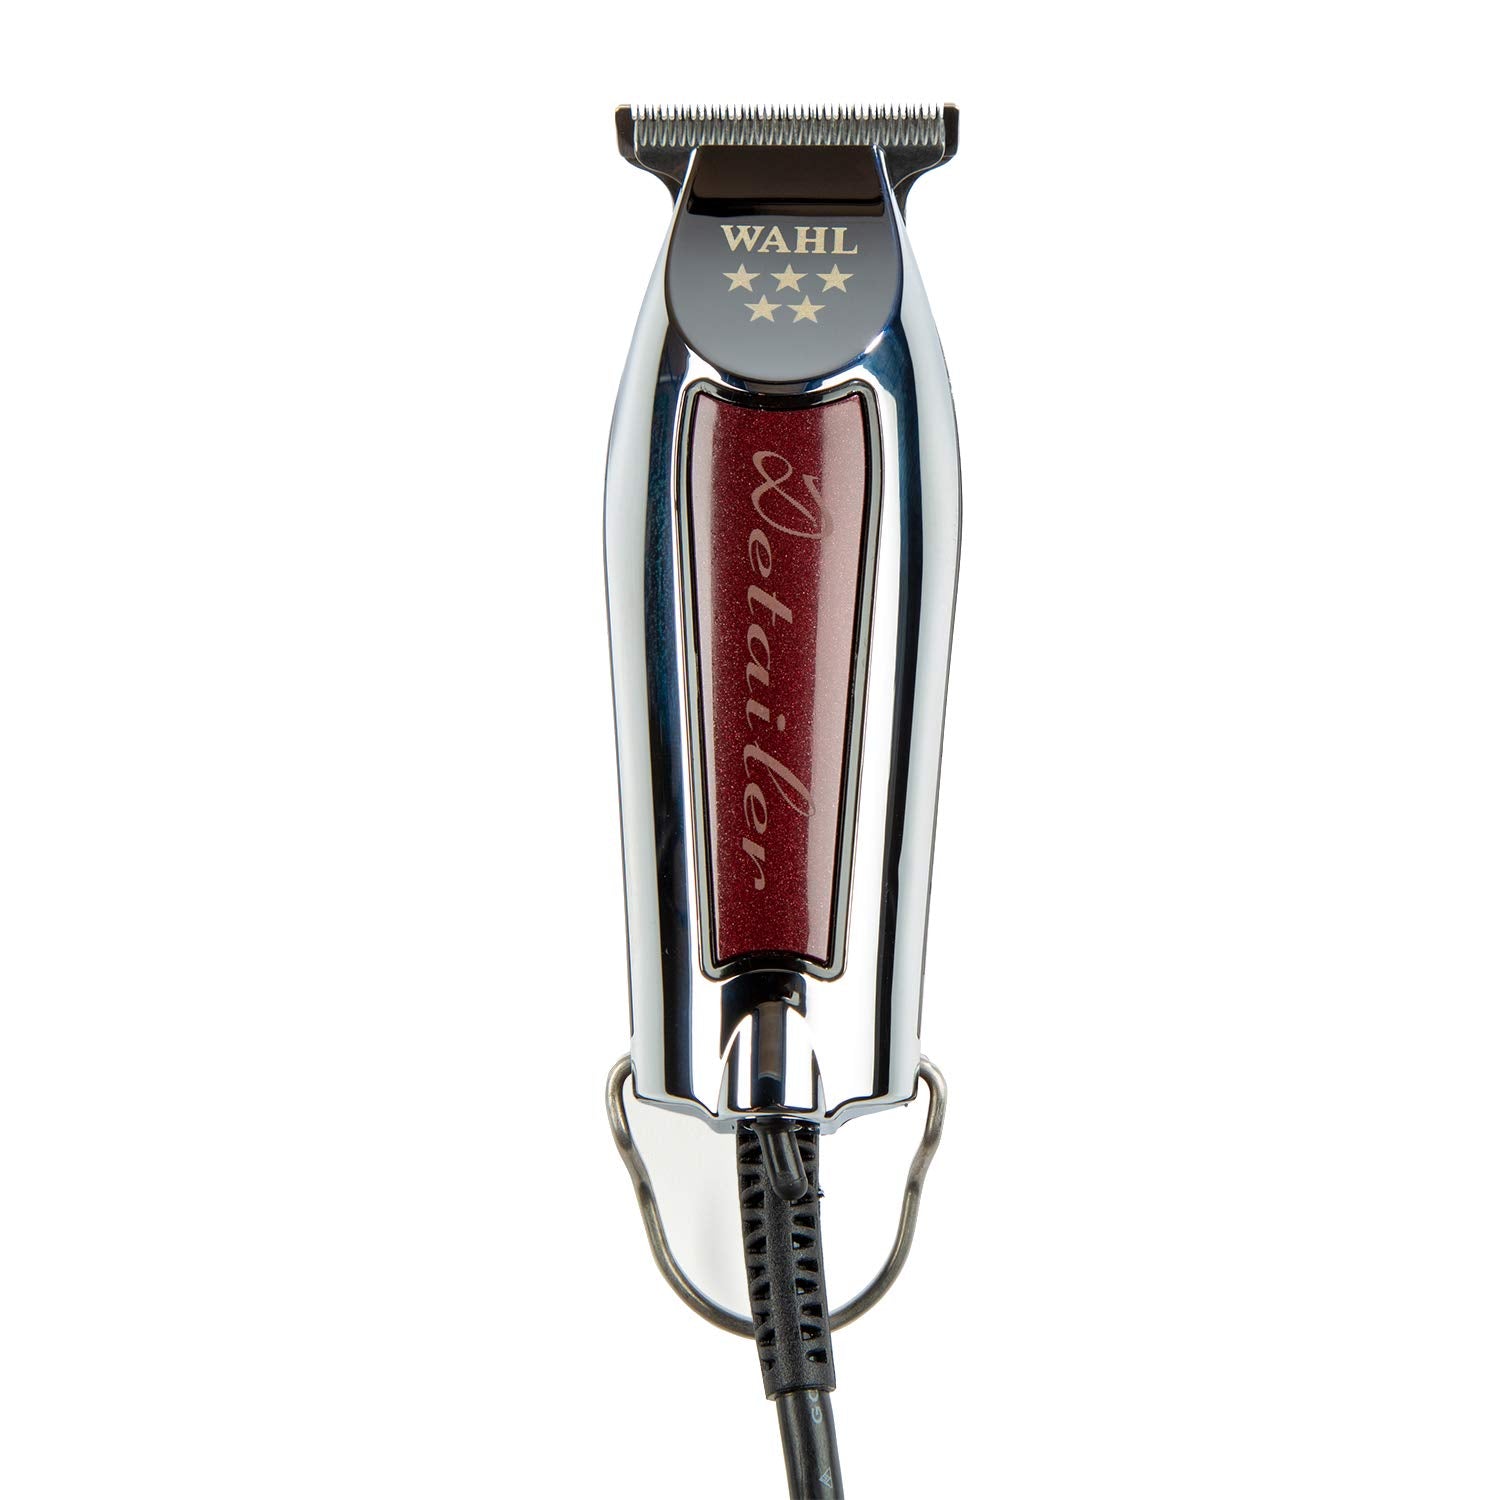 Wahl Detailer Professional Corded Rotary Trimmer